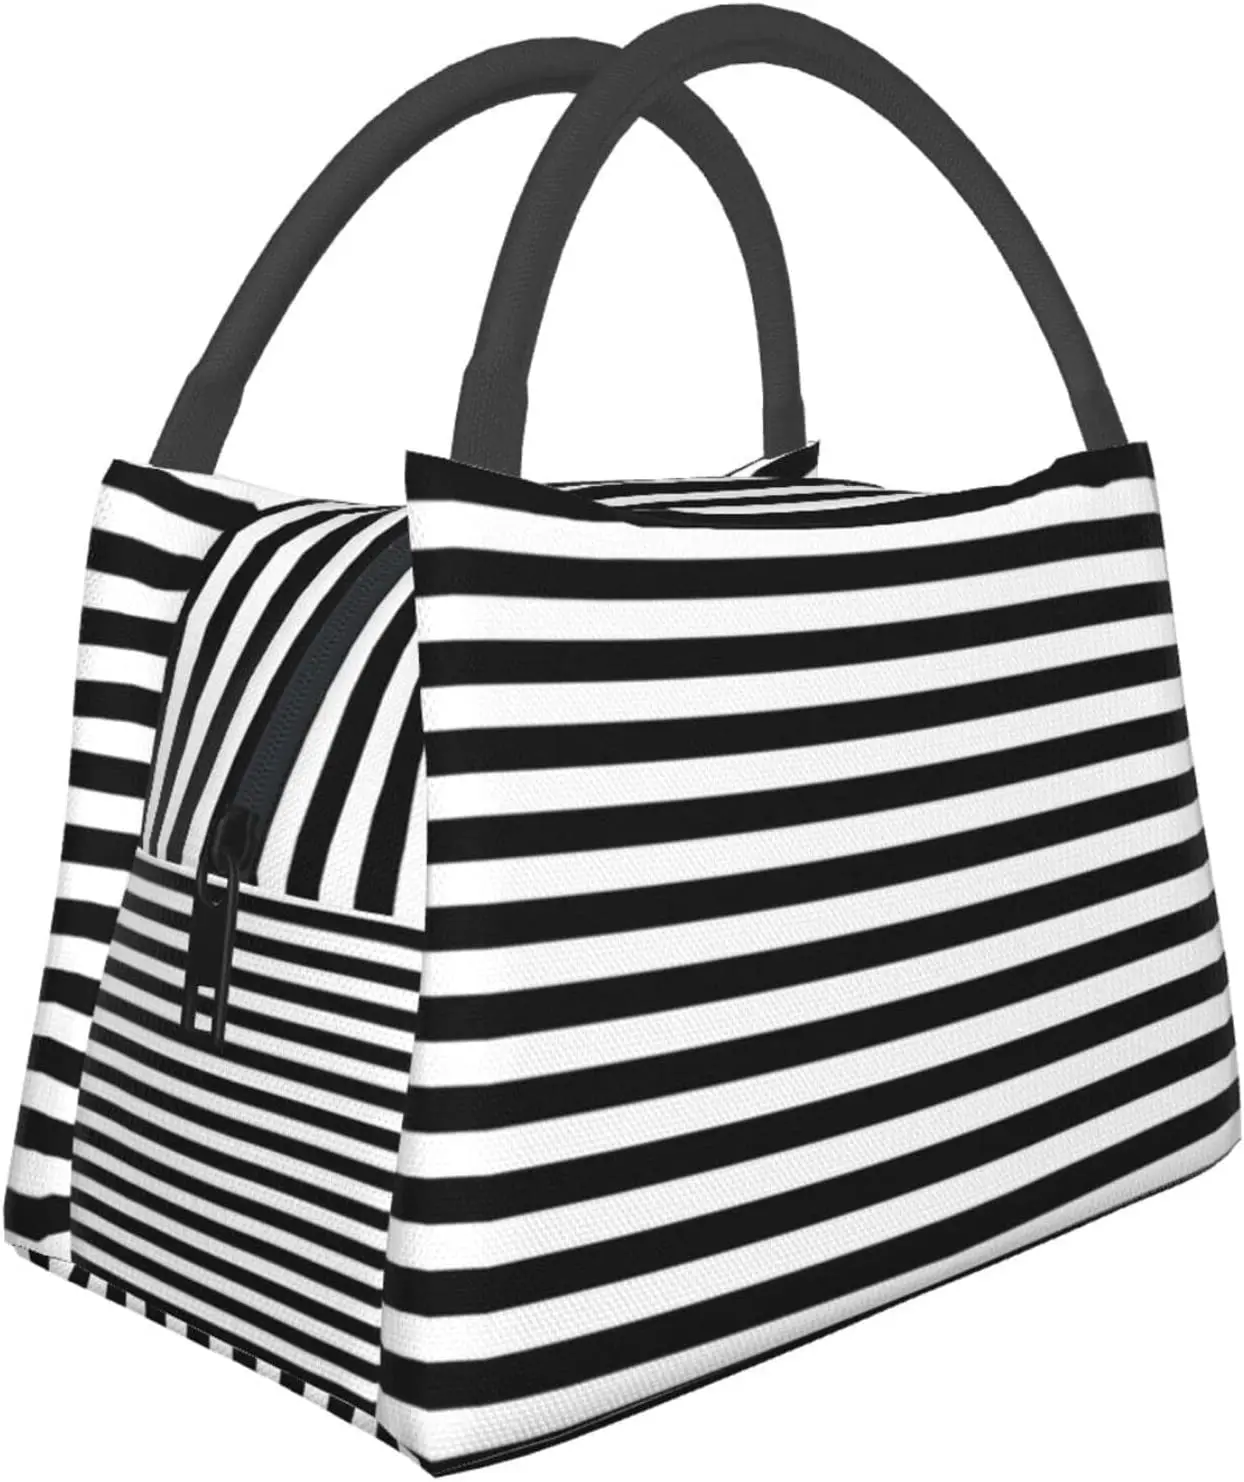 

Black White Zebra Stripes Thermal Lunch Bag Portable Waterproof Modern Personality Print Tote Bags Insulated Bento Bag Reusable